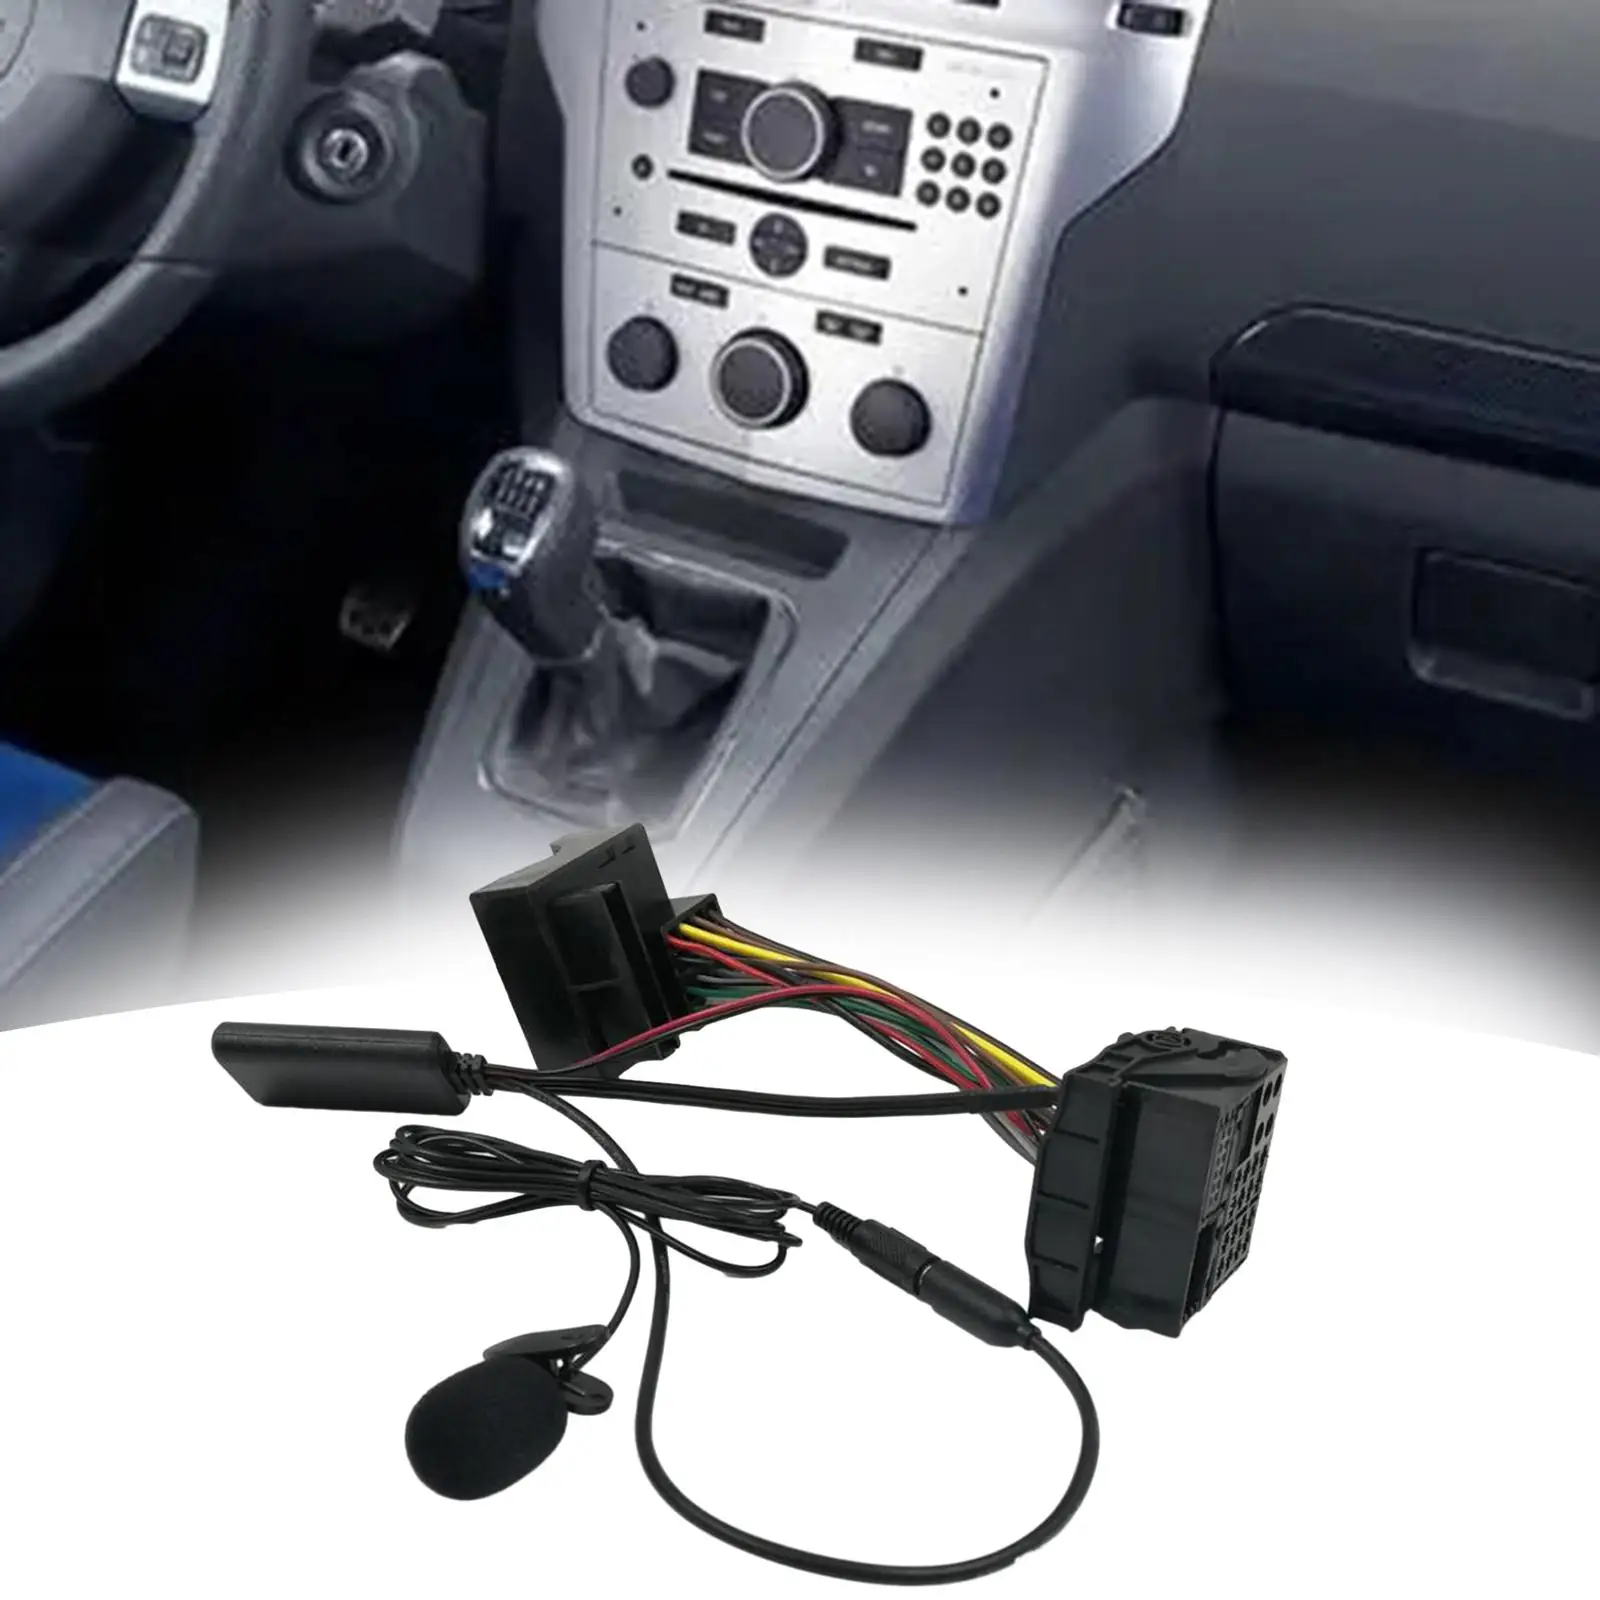 Car Bluetooth AUX Adapter Replace Parts Bluetooth 5.0 Music Cable Module for Opel CD30 CD40 CD70 DVD90 Automotive Accessories